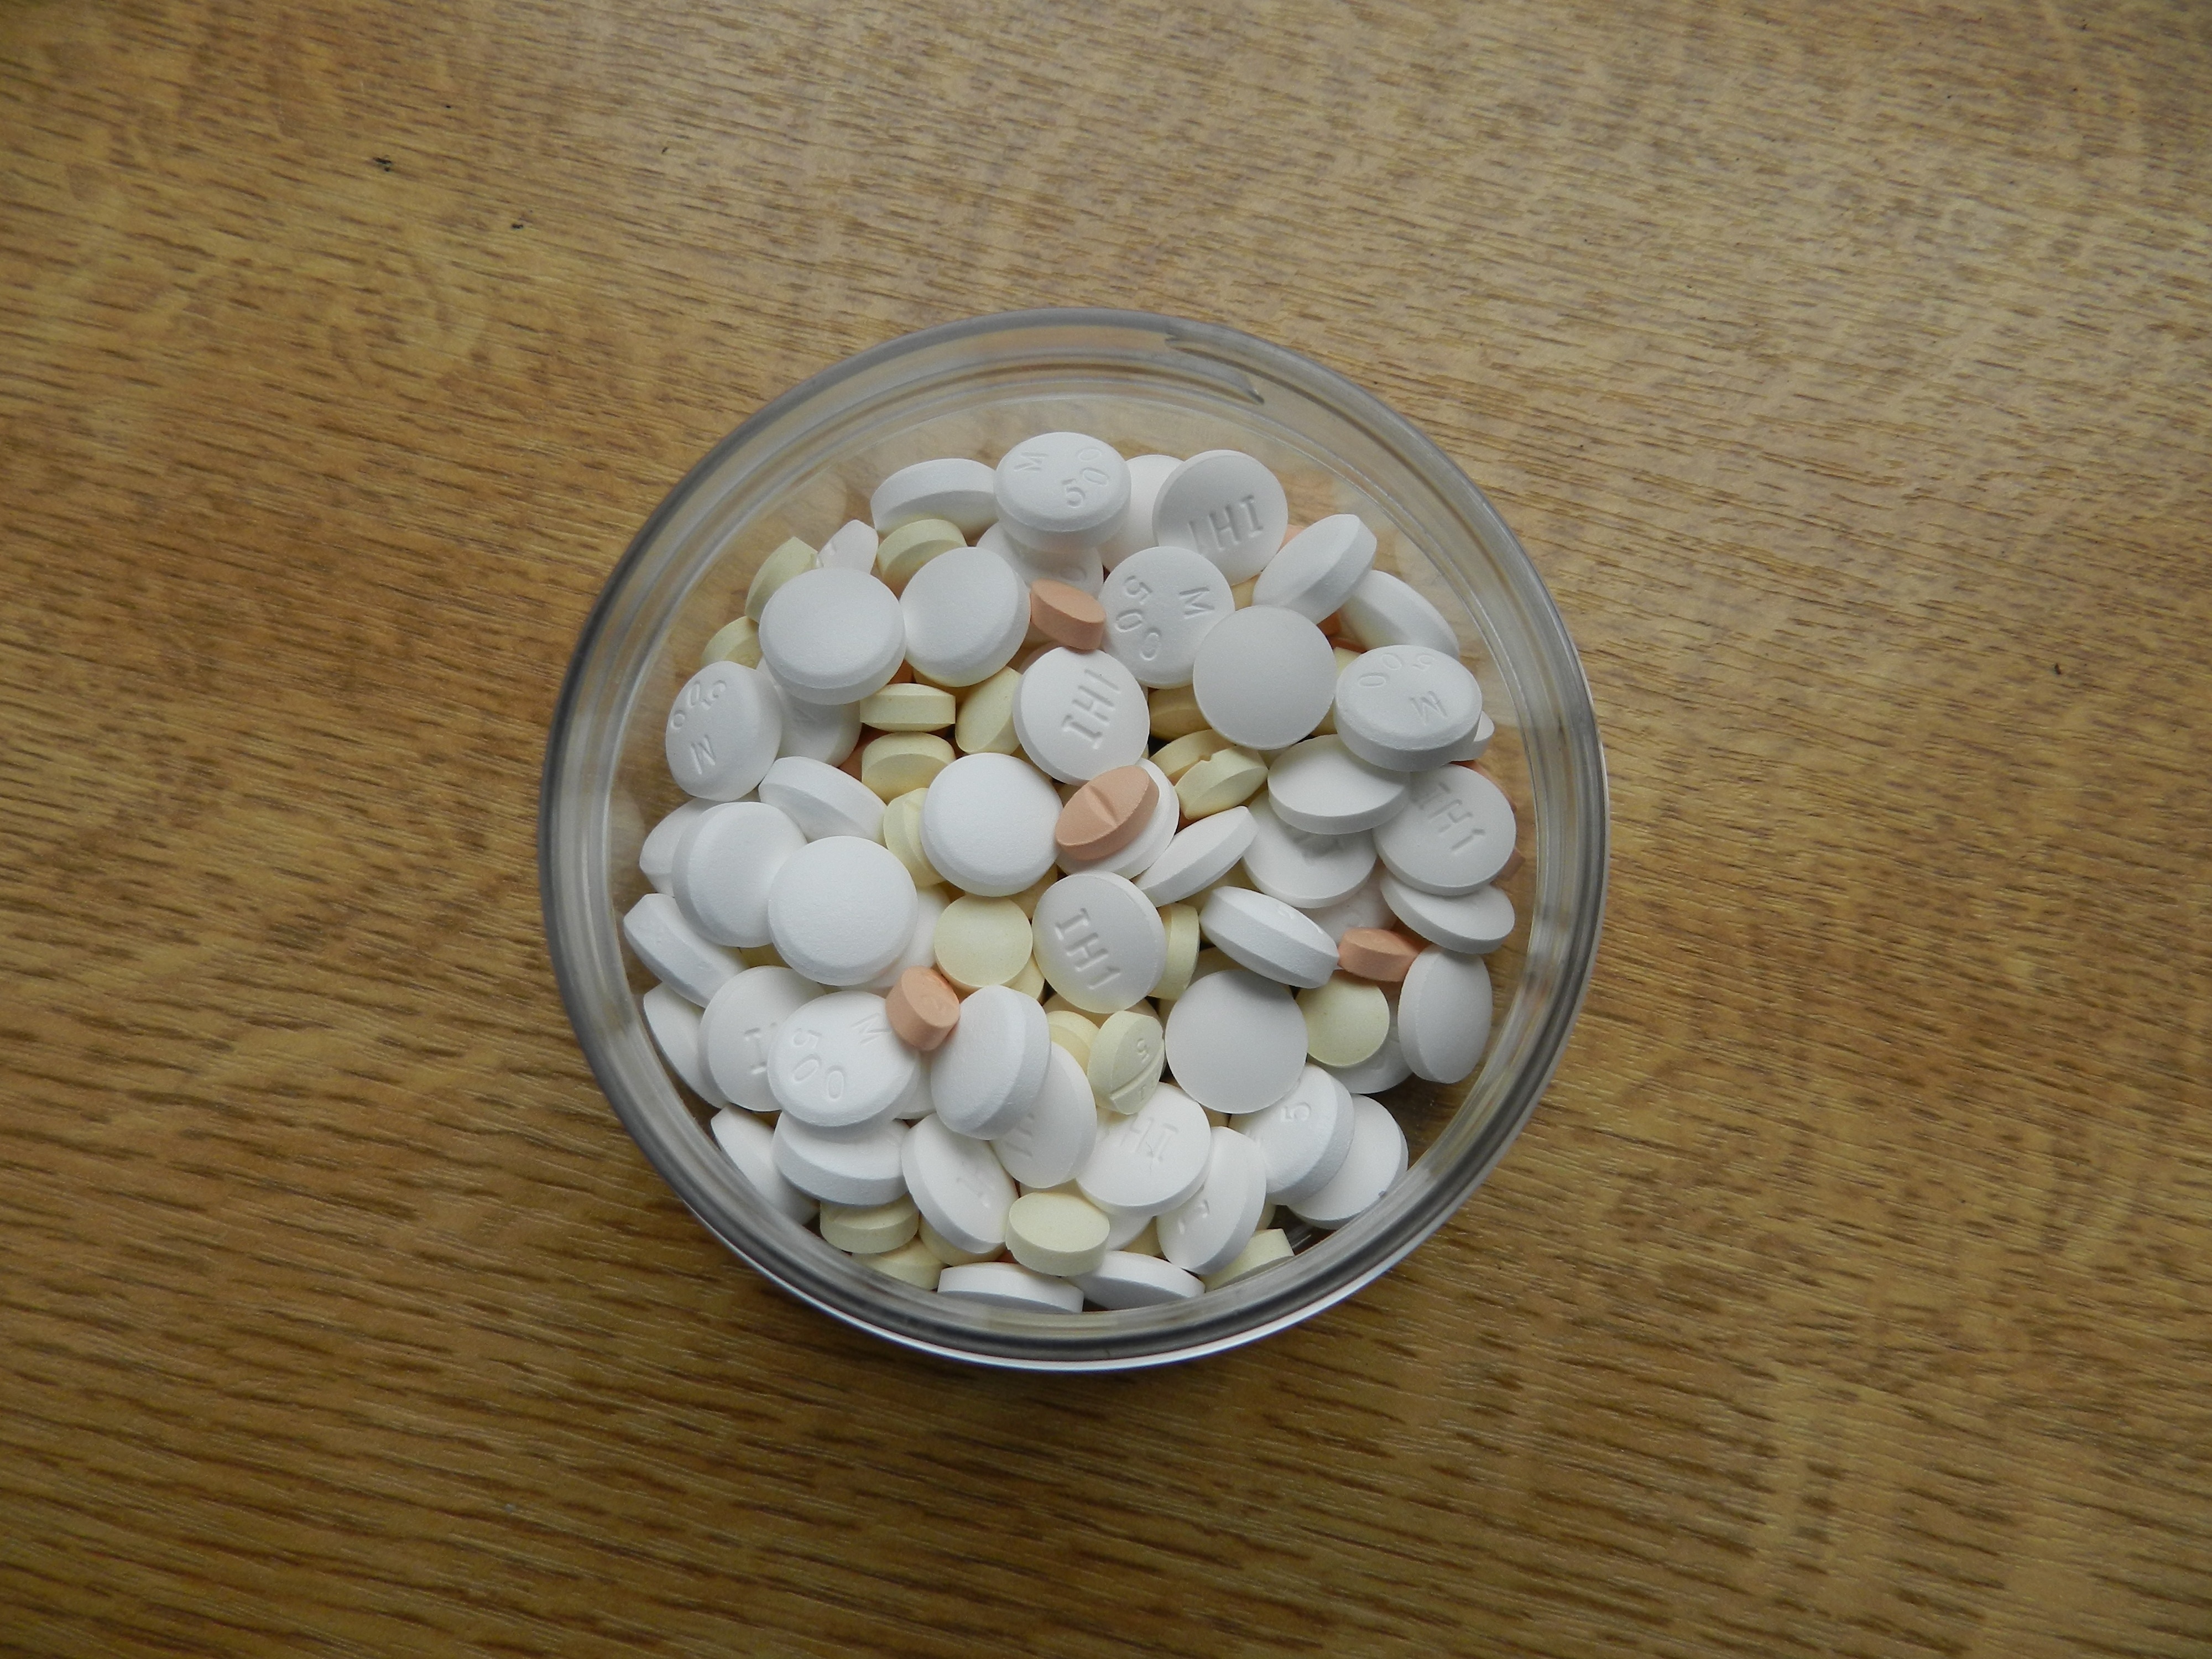 assorted round medical tablet